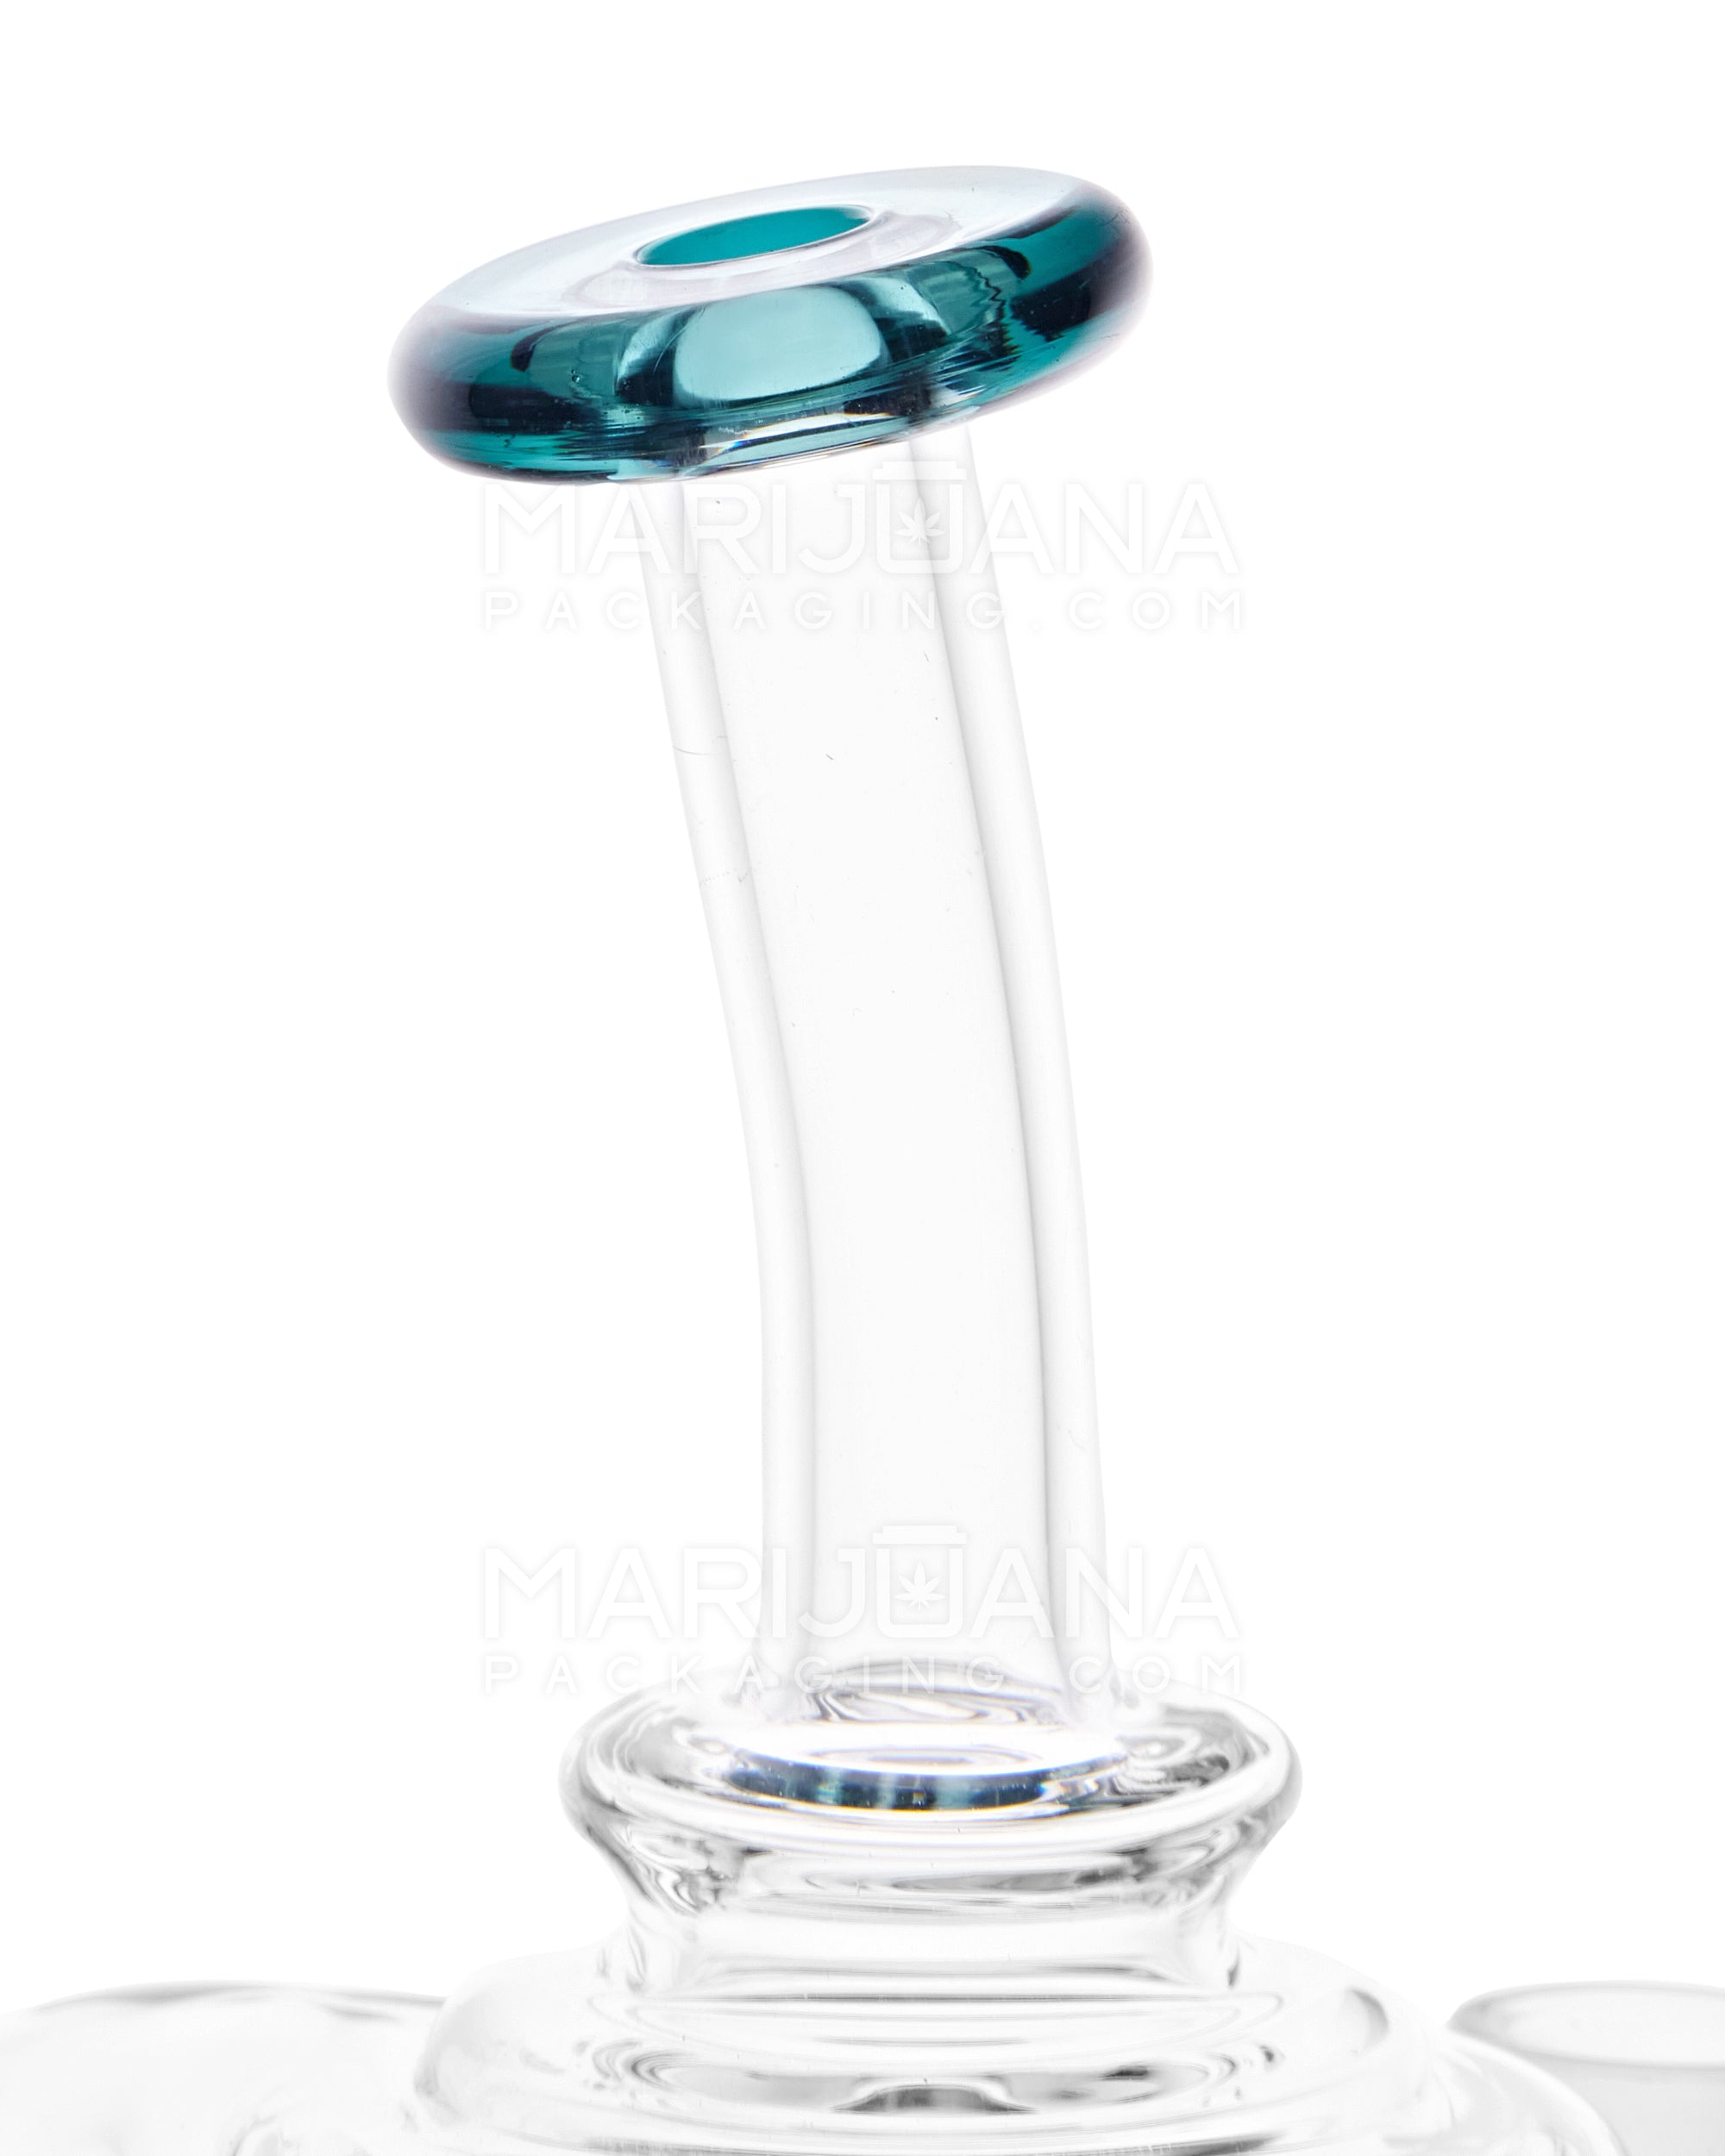 USA Glass | Bent Neck Dual Uptake Recycler Water Pipe w/ Showerhead Perc | 5.5in Tall - 10mm Bowl - Teal